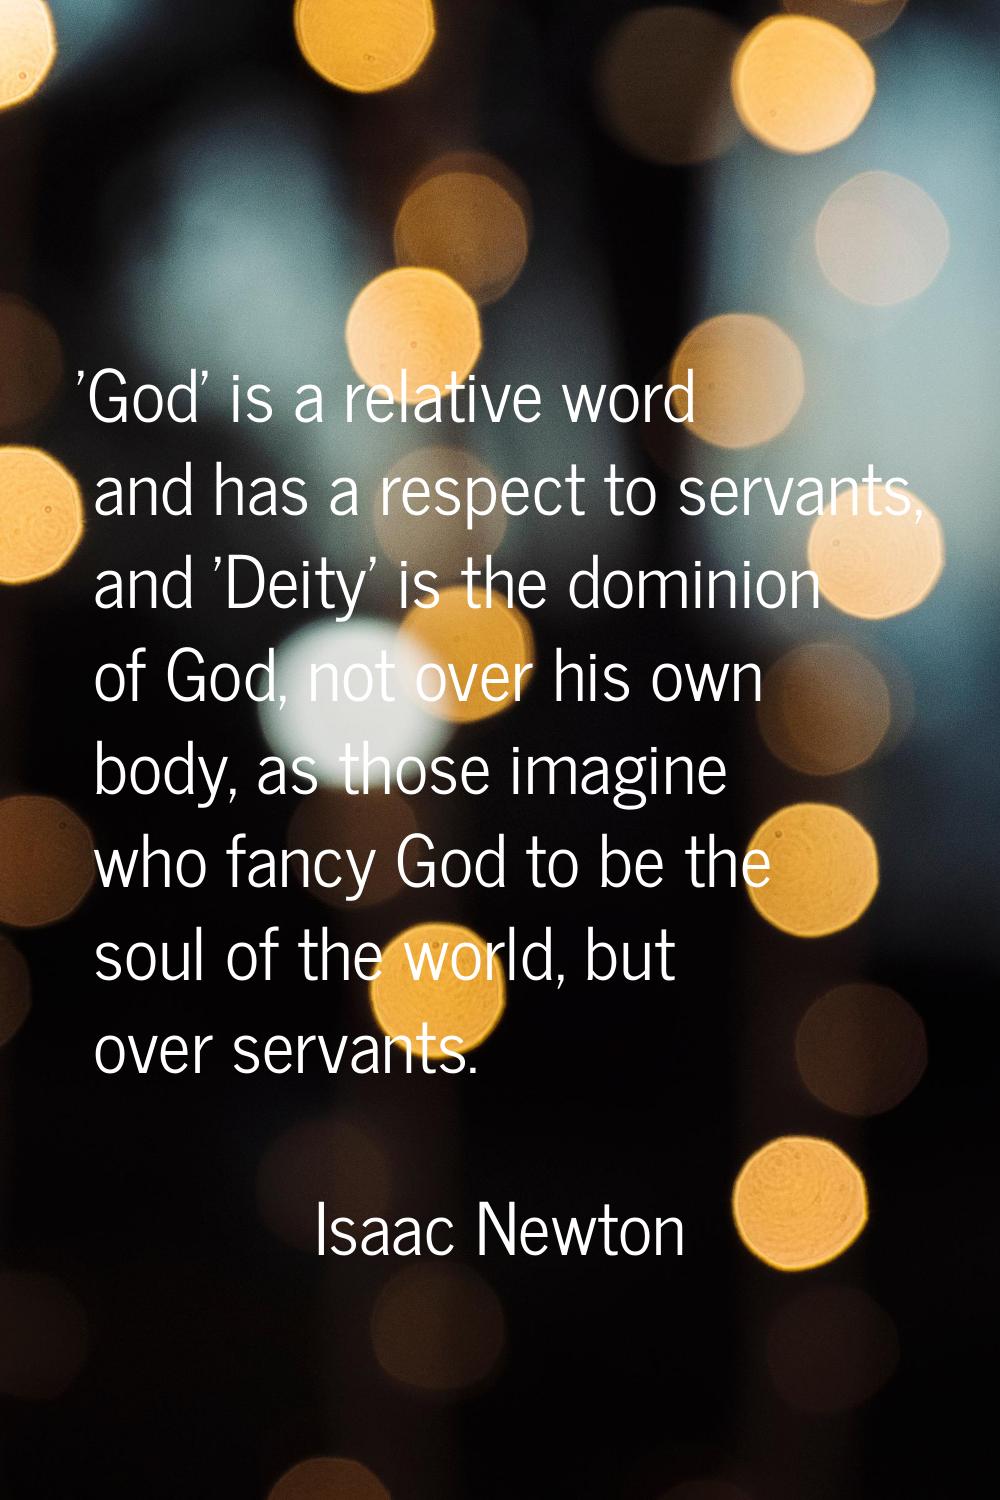 'God' is a relative word and has a respect to servants, and 'Deity' is the dominion of God, not ove